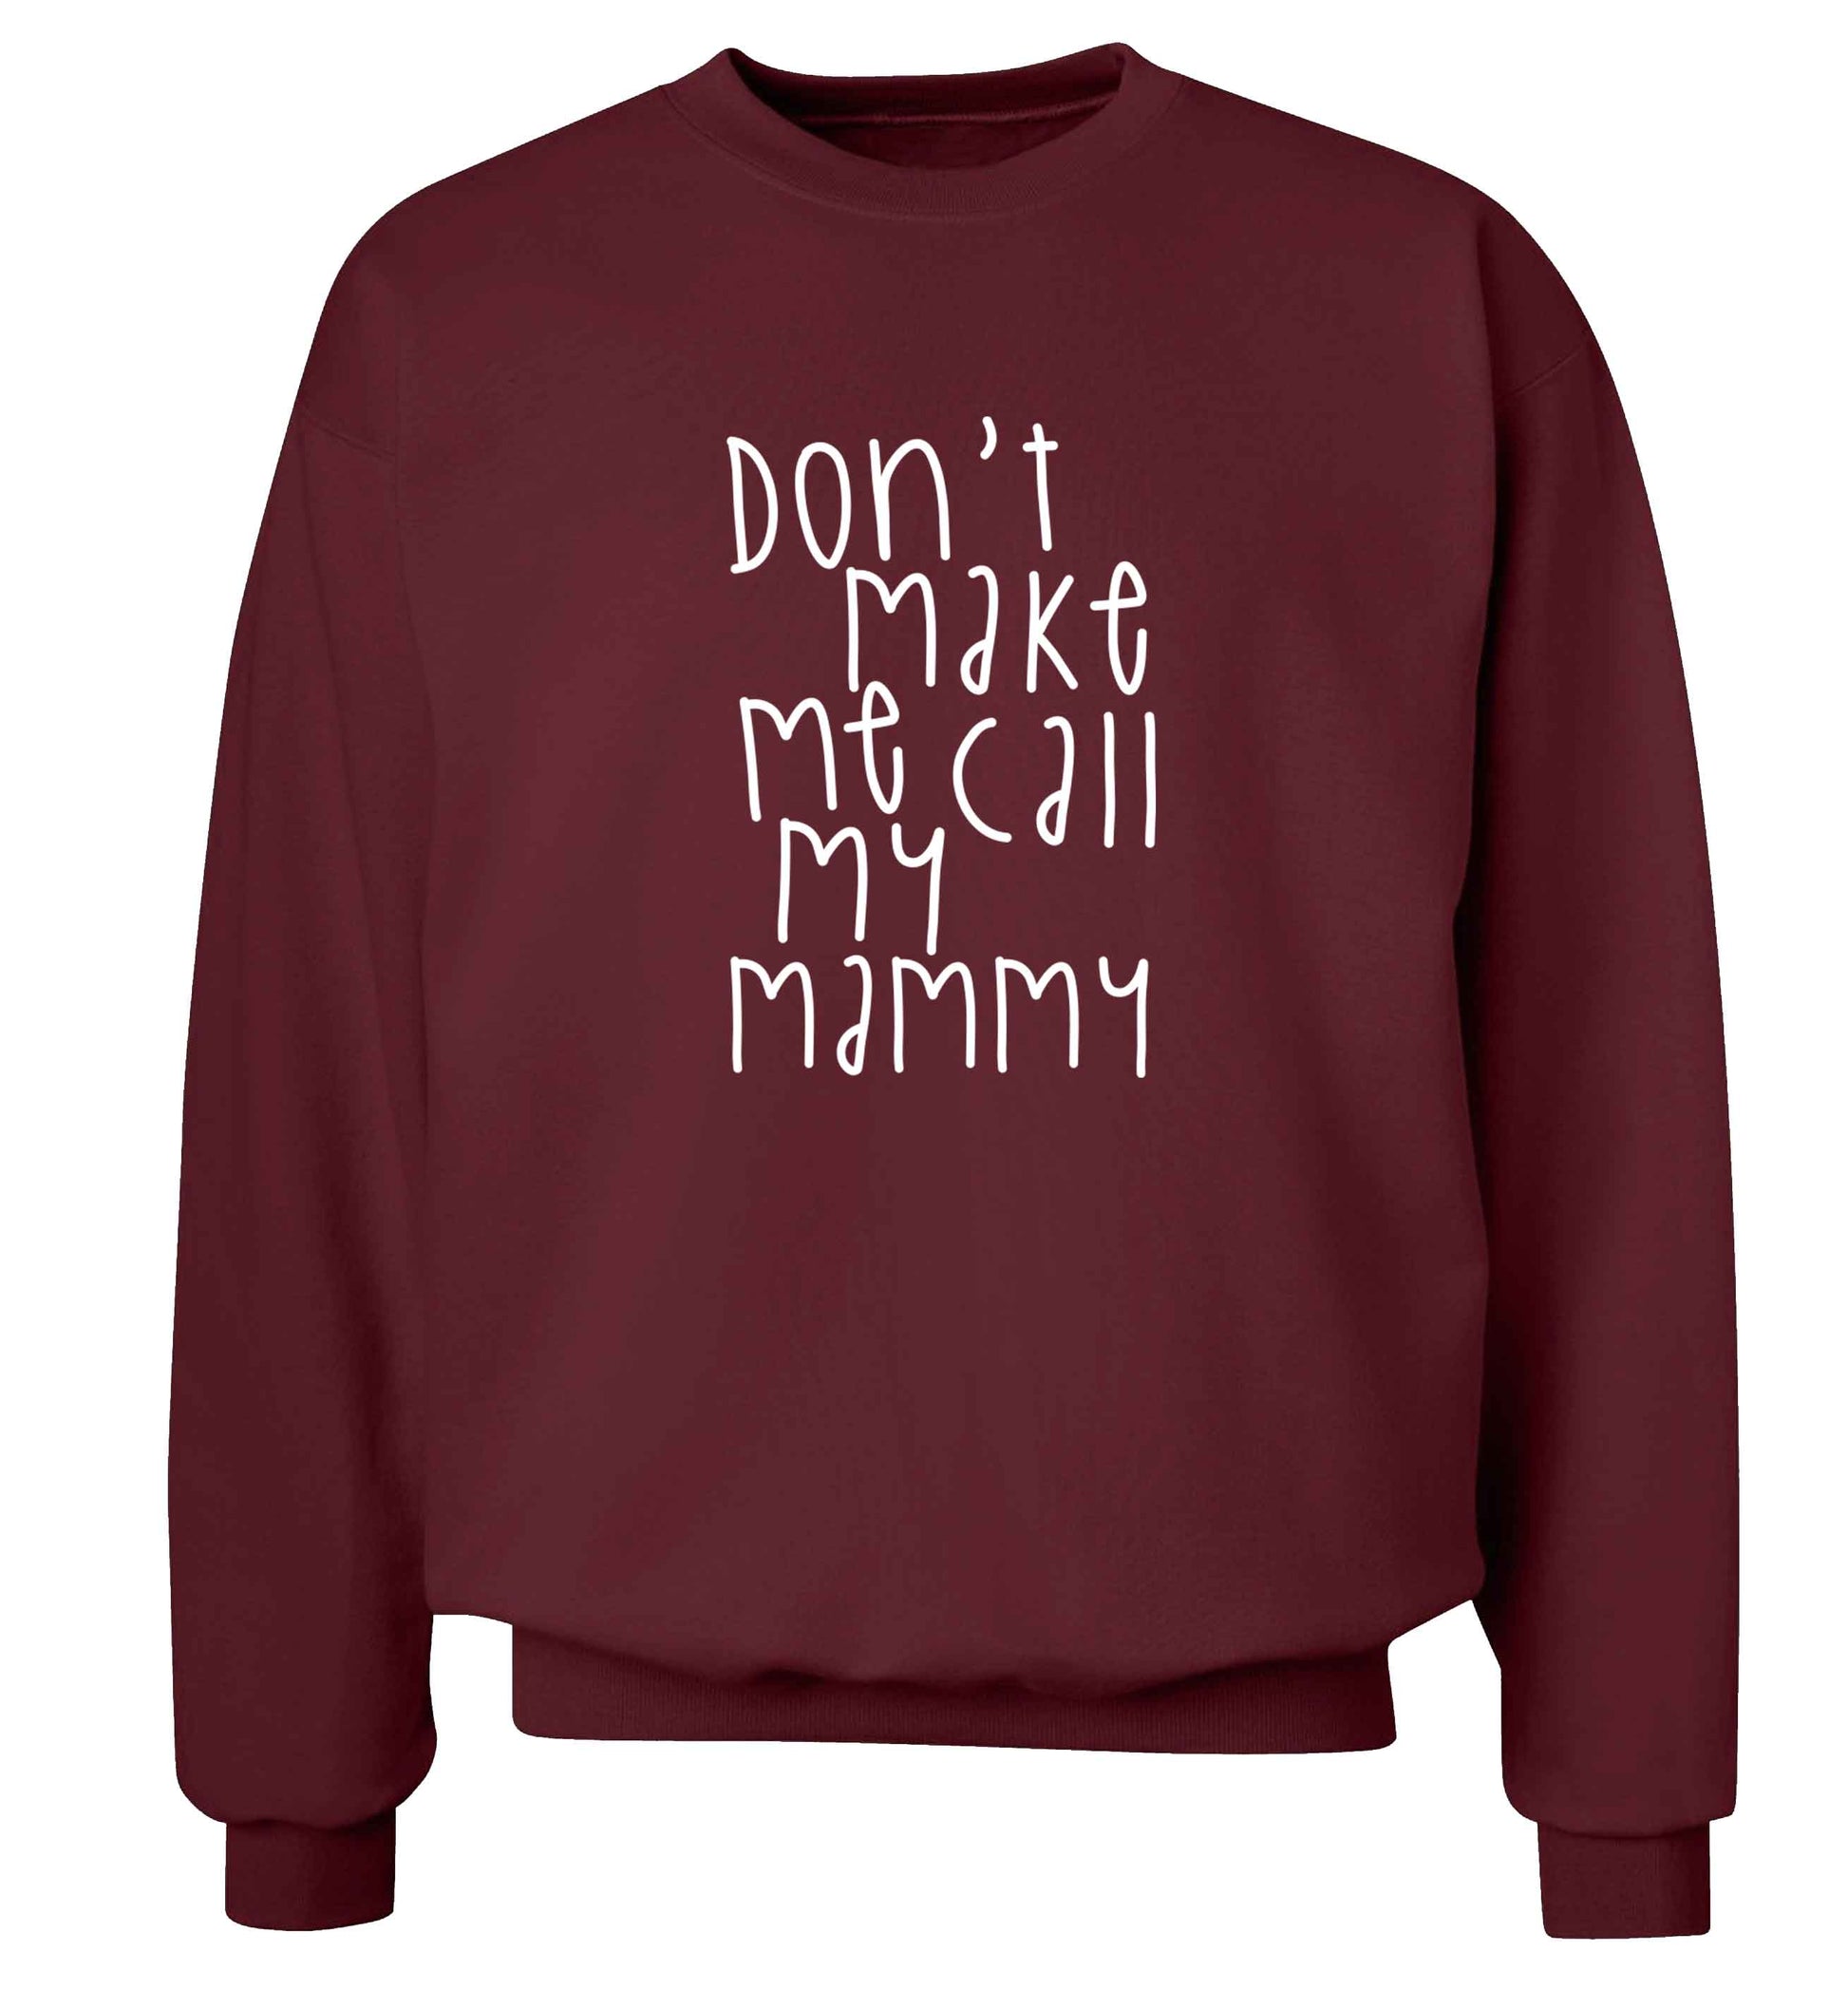 Don't make me call my mammy adult's unisex maroon sweater 2XL